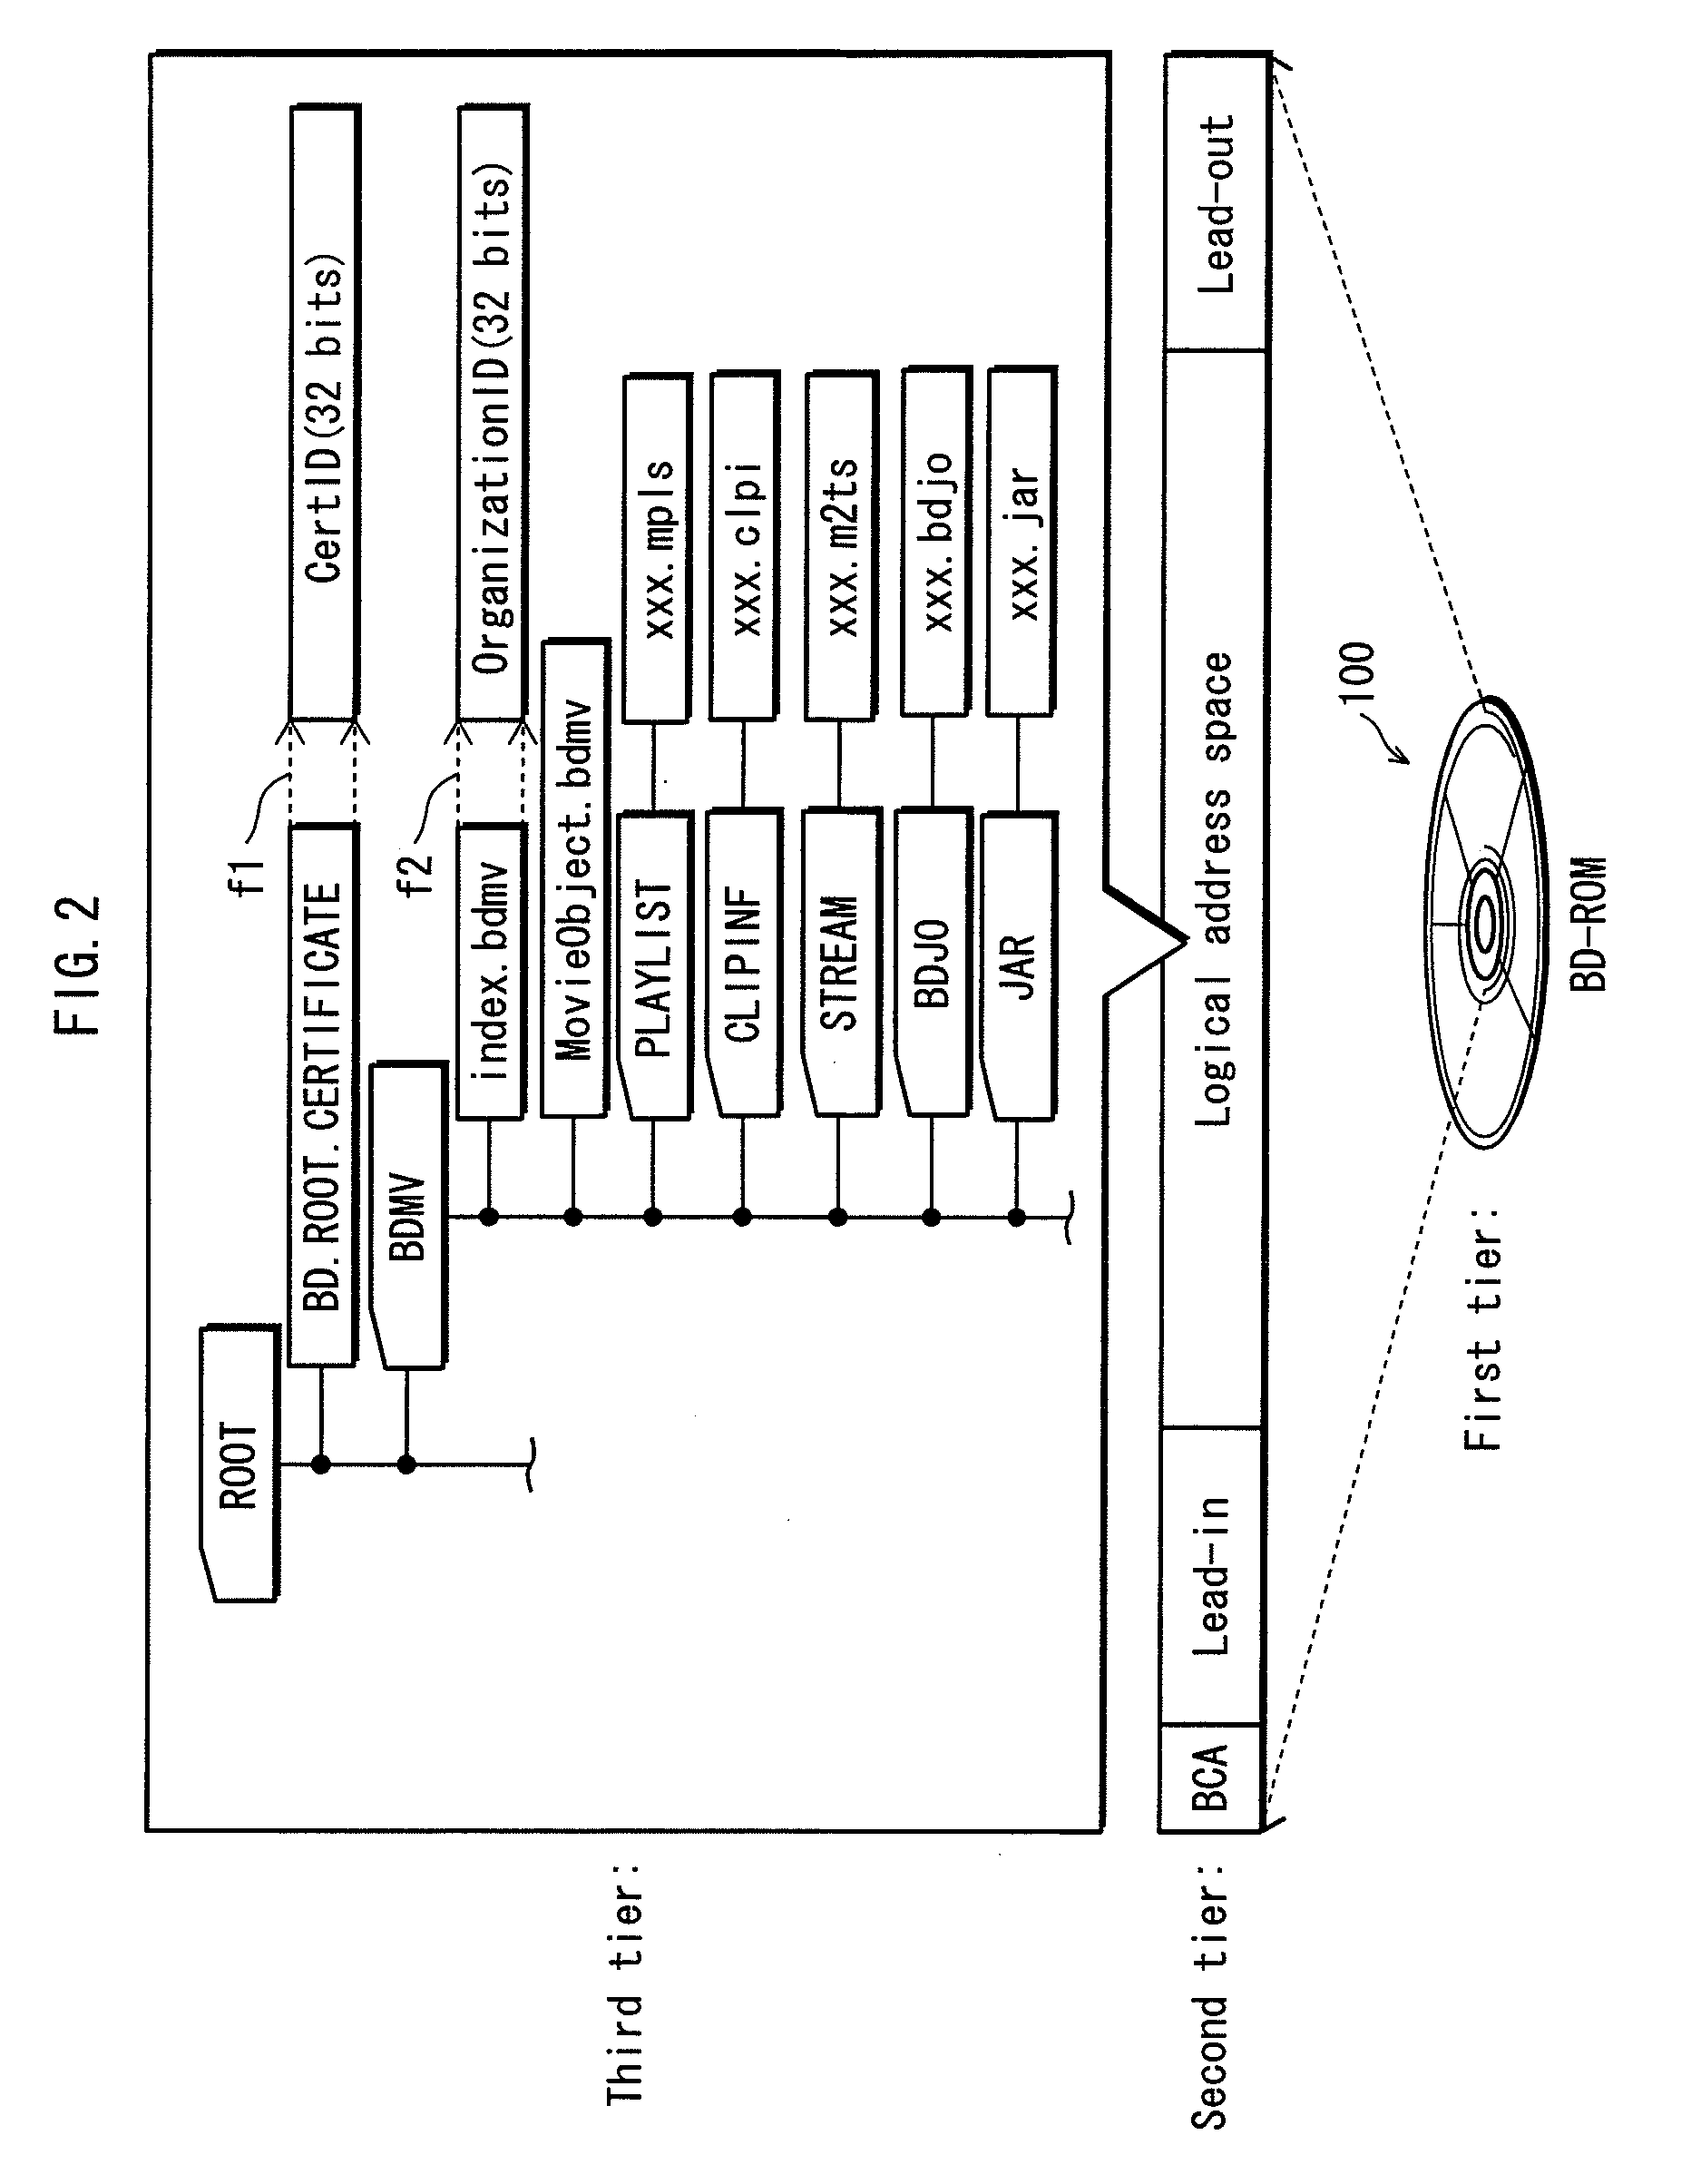 Reproducing apparatus, system lsi, and initialization method